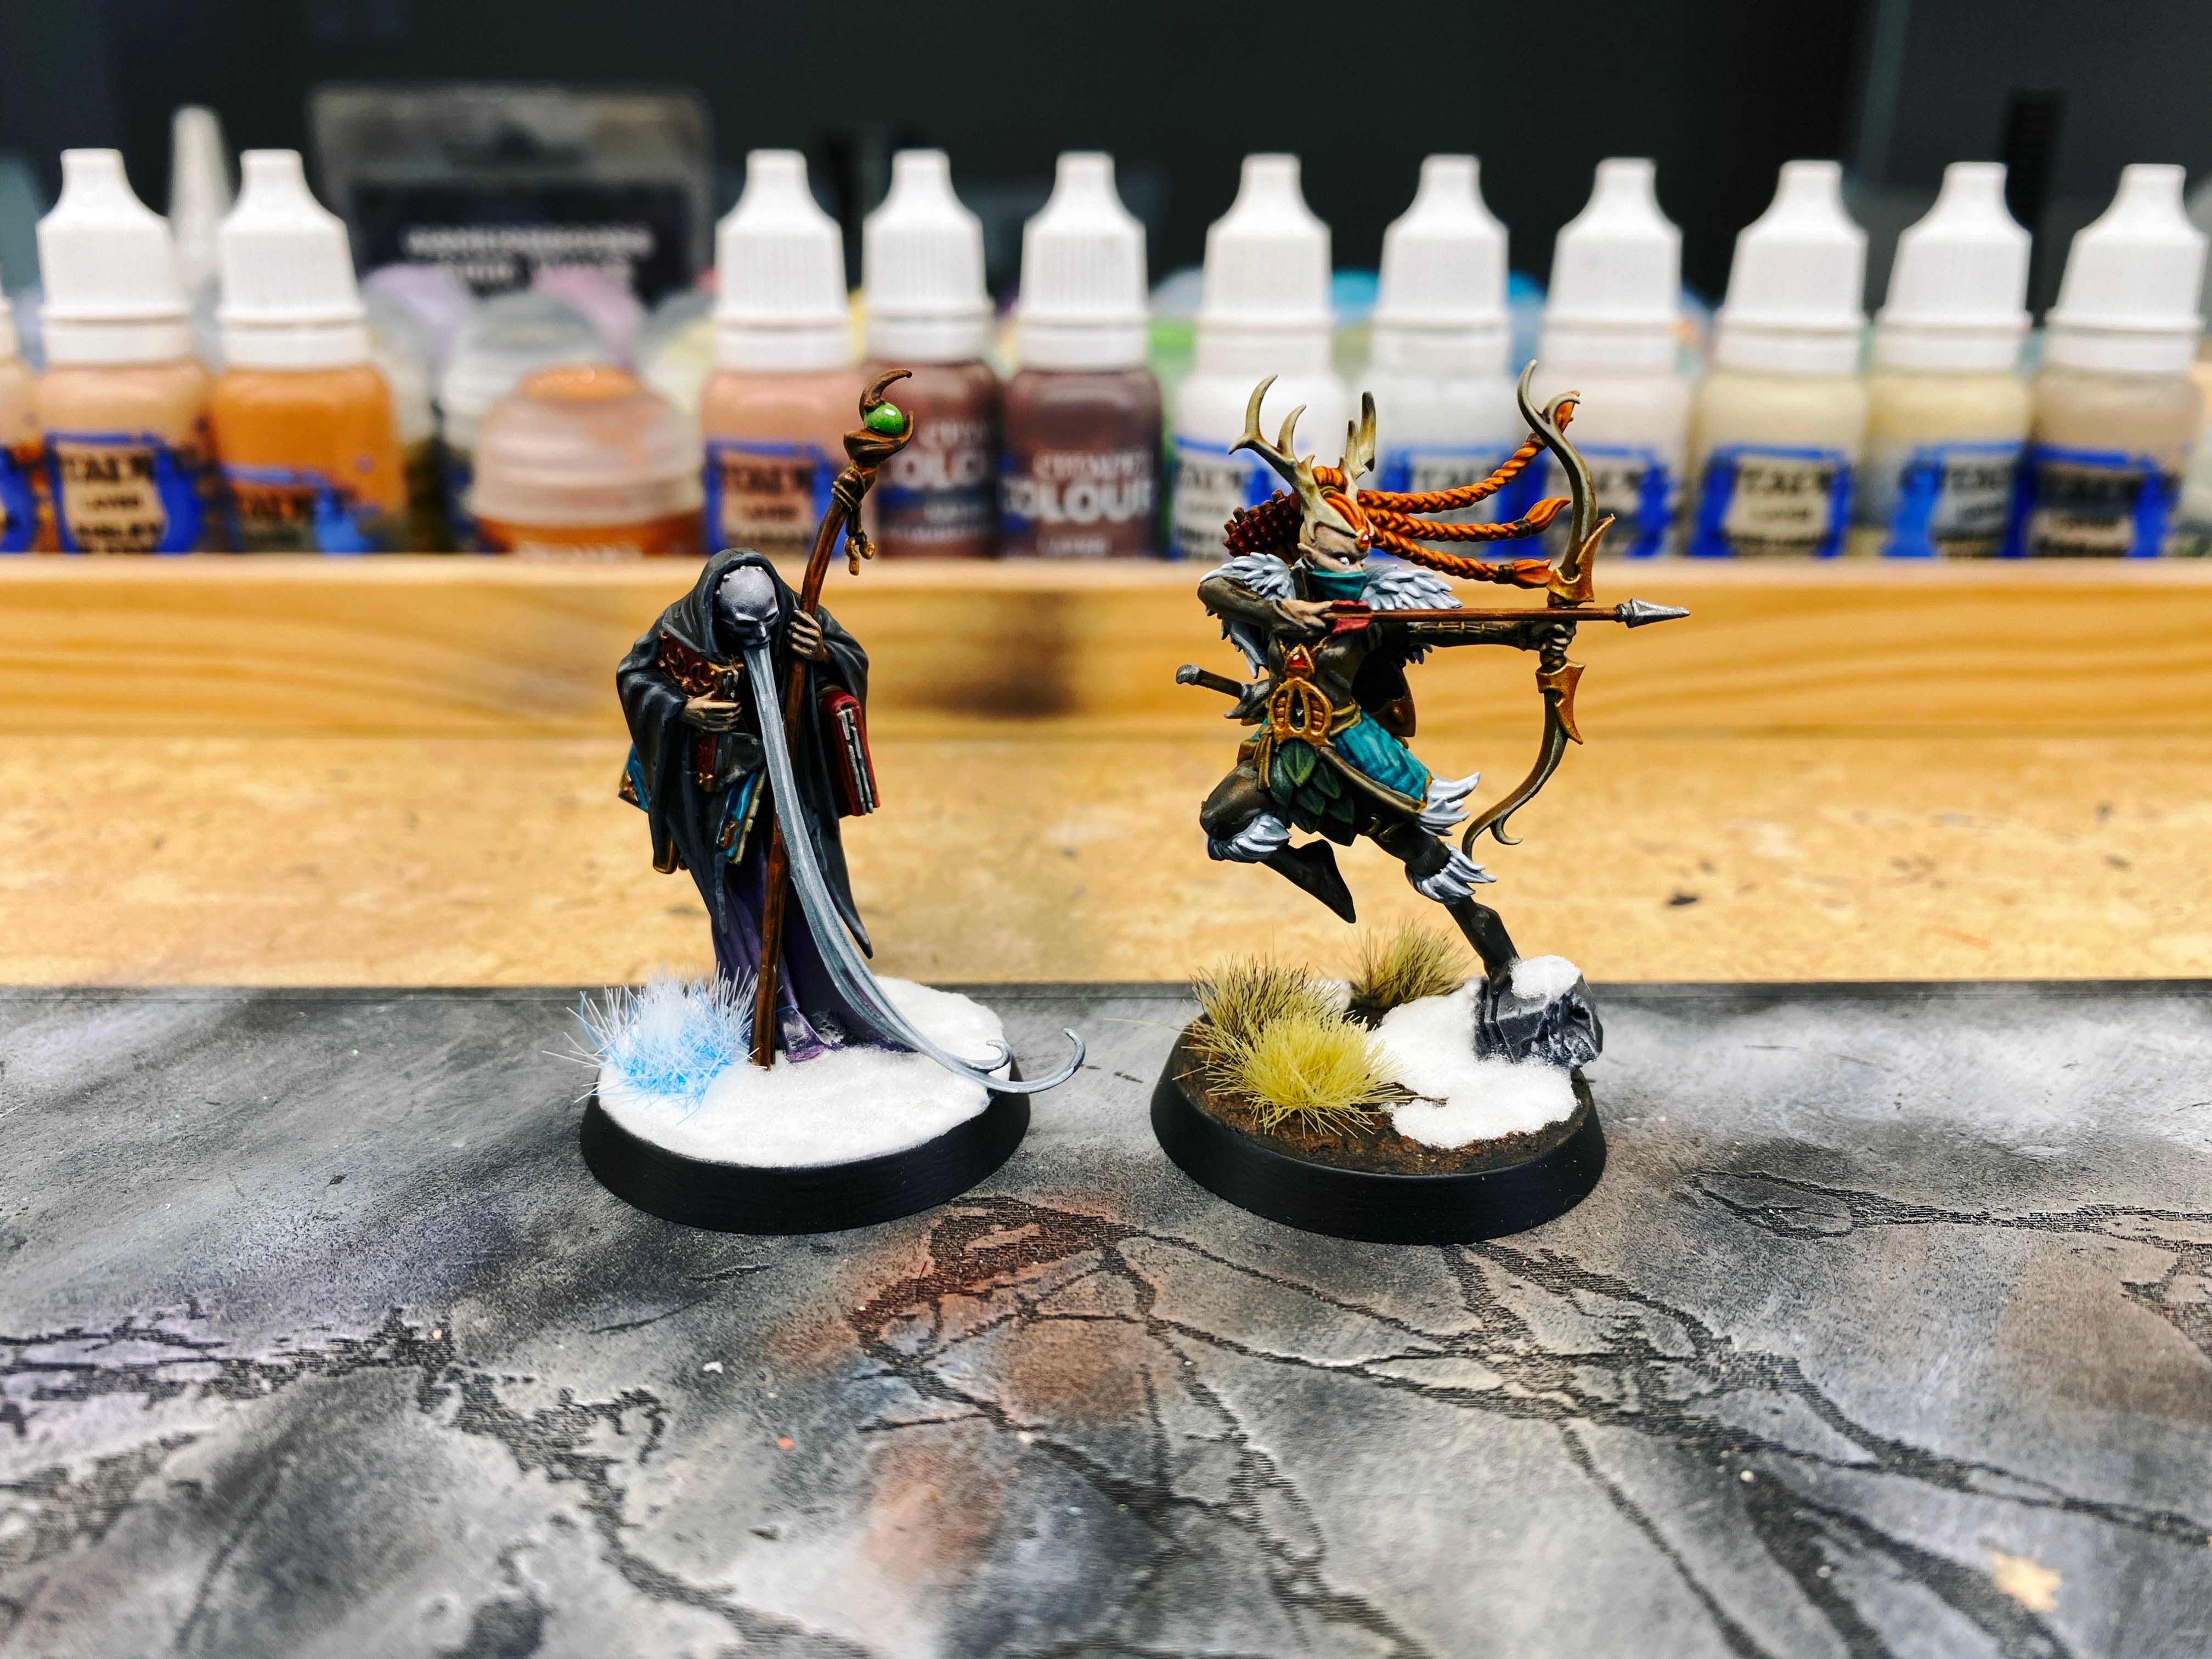 A photo of two painted miniatures. One is a wizened old man with an EXTRAORDINARILY long and thin beard that reaches down to the ground, wearing a black cloak and carrying several large books along with a tall wooden staff. Standing next to him is a lithe wood elf all dressed in greens and browns with a pair of antlers on her head. She's in the middle of aiming a bow an arrow and is simultaneously launching herself off a broken piece of stone on the ground. There's snow at the base of the stone and next to it, but the left half of the base is rich earth with grass tufts on it.